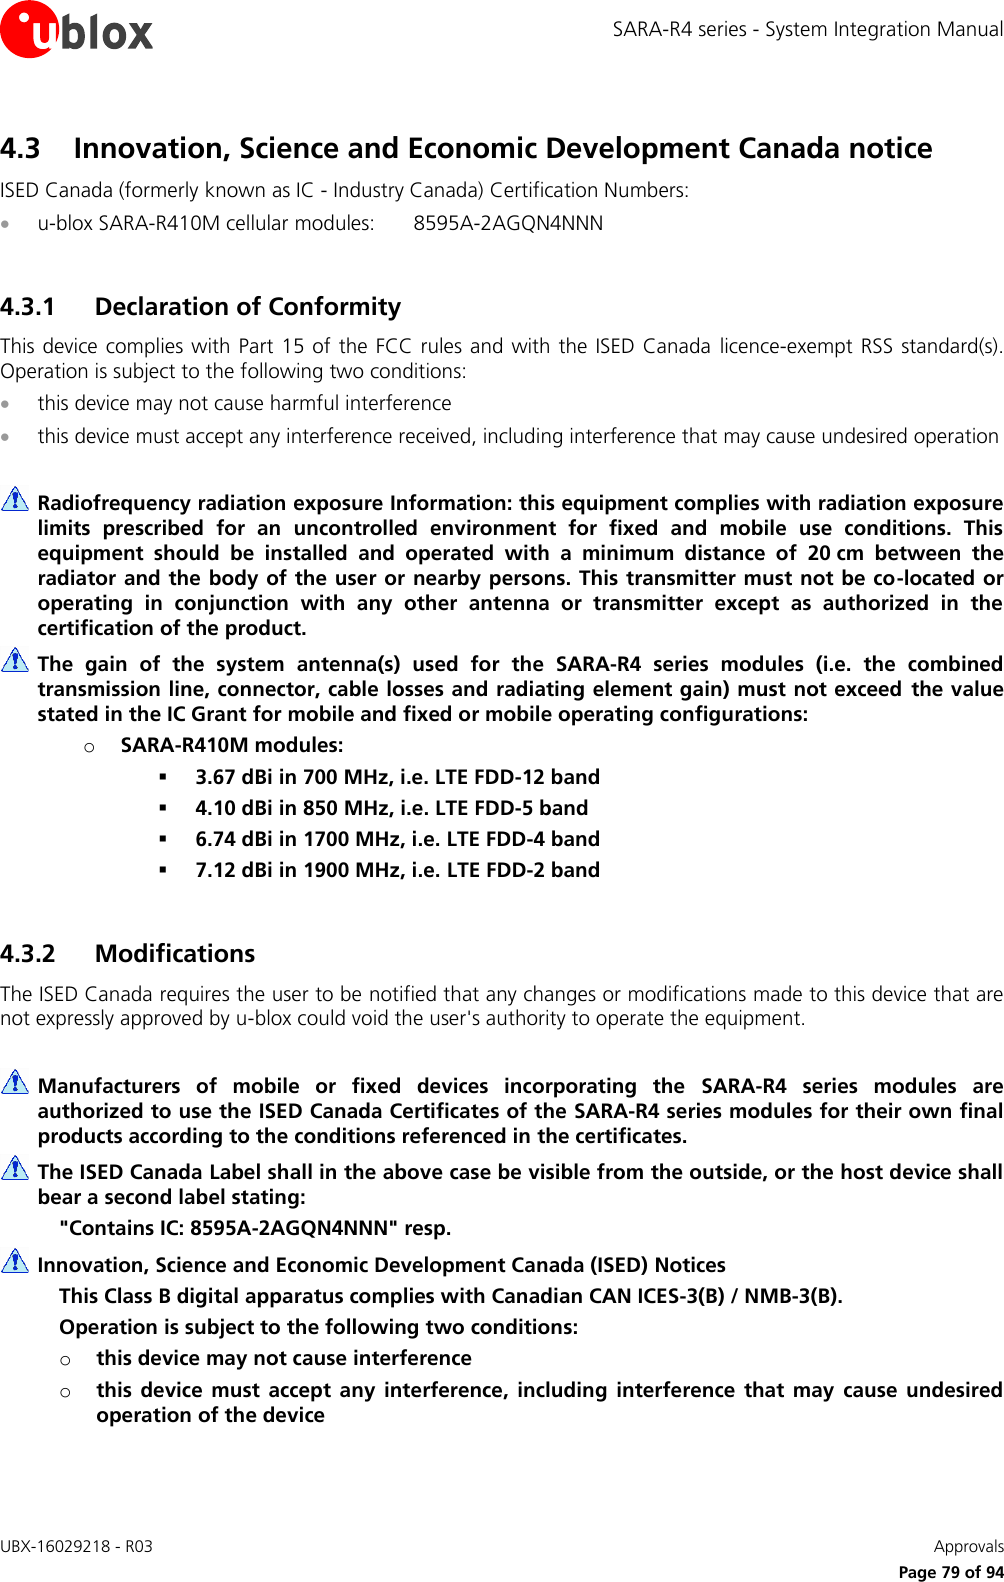 SARA-R4 series - System Integration Manual UBX-16029218 - R03    Approvals     Page 79 of 94 4.3 Innovation, Science and Economic Development Canada notice ISED Canada (formerly known as IC - Industry Canada) Certification Numbers:  u-blox SARA-R410M cellular modules:  8595A-2AGQN4NNN  4.3.1 Declaration of Conformity This device complies with Part  15  of  the  FCC  rules and with the  ISED  Canada licence-exempt  RSS  standard(s). Operation is subject to the following two conditions:  this device may not cause harmful interference  this device must accept any interference received, including interference that may cause undesired operation   Radiofrequency radiation exposure Information: this equipment complies with radiation exposure limits  prescribed  for  an  uncontrolled  environment  for  fixed  and  mobile  use  conditions.  This equipment  should  be  installed  and  operated  with  a  minimum  distance  of  20 cm  between  the radiator and the body of the user or nearby persons. This transmitter must not be co-located or operating  in  conjunction  with  any  other  antenna  or  transmitter  except  as  authorized  in  the certification of the product.  The  gain  of  the  system  antenna(s)  used  for  the  SARA-R4  series  modules  (i.e.  the  combined transmission line, connector, cable losses and radiating element gain) must not exceed  the value stated in the IC Grant for mobile and fixed or mobile operating configurations: o SARA-R410M modules:  3.67 dBi in 700 MHz, i.e. LTE FDD-12 band  4.10 dBi in 850 MHz, i.e. LTE FDD-5 band   6.74 dBi in 1700 MHz, i.e. LTE FDD-4 band  7.12 dBi in 1900 MHz, i.e. LTE FDD-2 band   4.3.2 Modifications The ISED Canada requires the user to be notified that any changes or modifications made to this device that are not expressly approved by u-blox could void the user&apos;s authority to operate the equipment.   Manufacturers  of  mobile  or  fixed  devices  incorporating  the  SARA-R4  series  modules  are authorized to use the ISED Canada Certificates of the SARA-R4 series modules for their own final products according to the conditions referenced in the certificates.  The ISED Canada Label shall in the above case be visible from the outside, or the host device shall bear a second label stating: &quot;Contains IC: 8595A-2AGQN4NNN&quot; resp.  Innovation, Science and Economic Development Canada (ISED) Notices This Class B digital apparatus complies with Canadian CAN ICES-3(B) / NMB-3(B). Operation is subject to the following two conditions: o this device may not cause interference o this  device  must  accept  any  interference,  including  interference  that  may  cause undesired operation of the device 